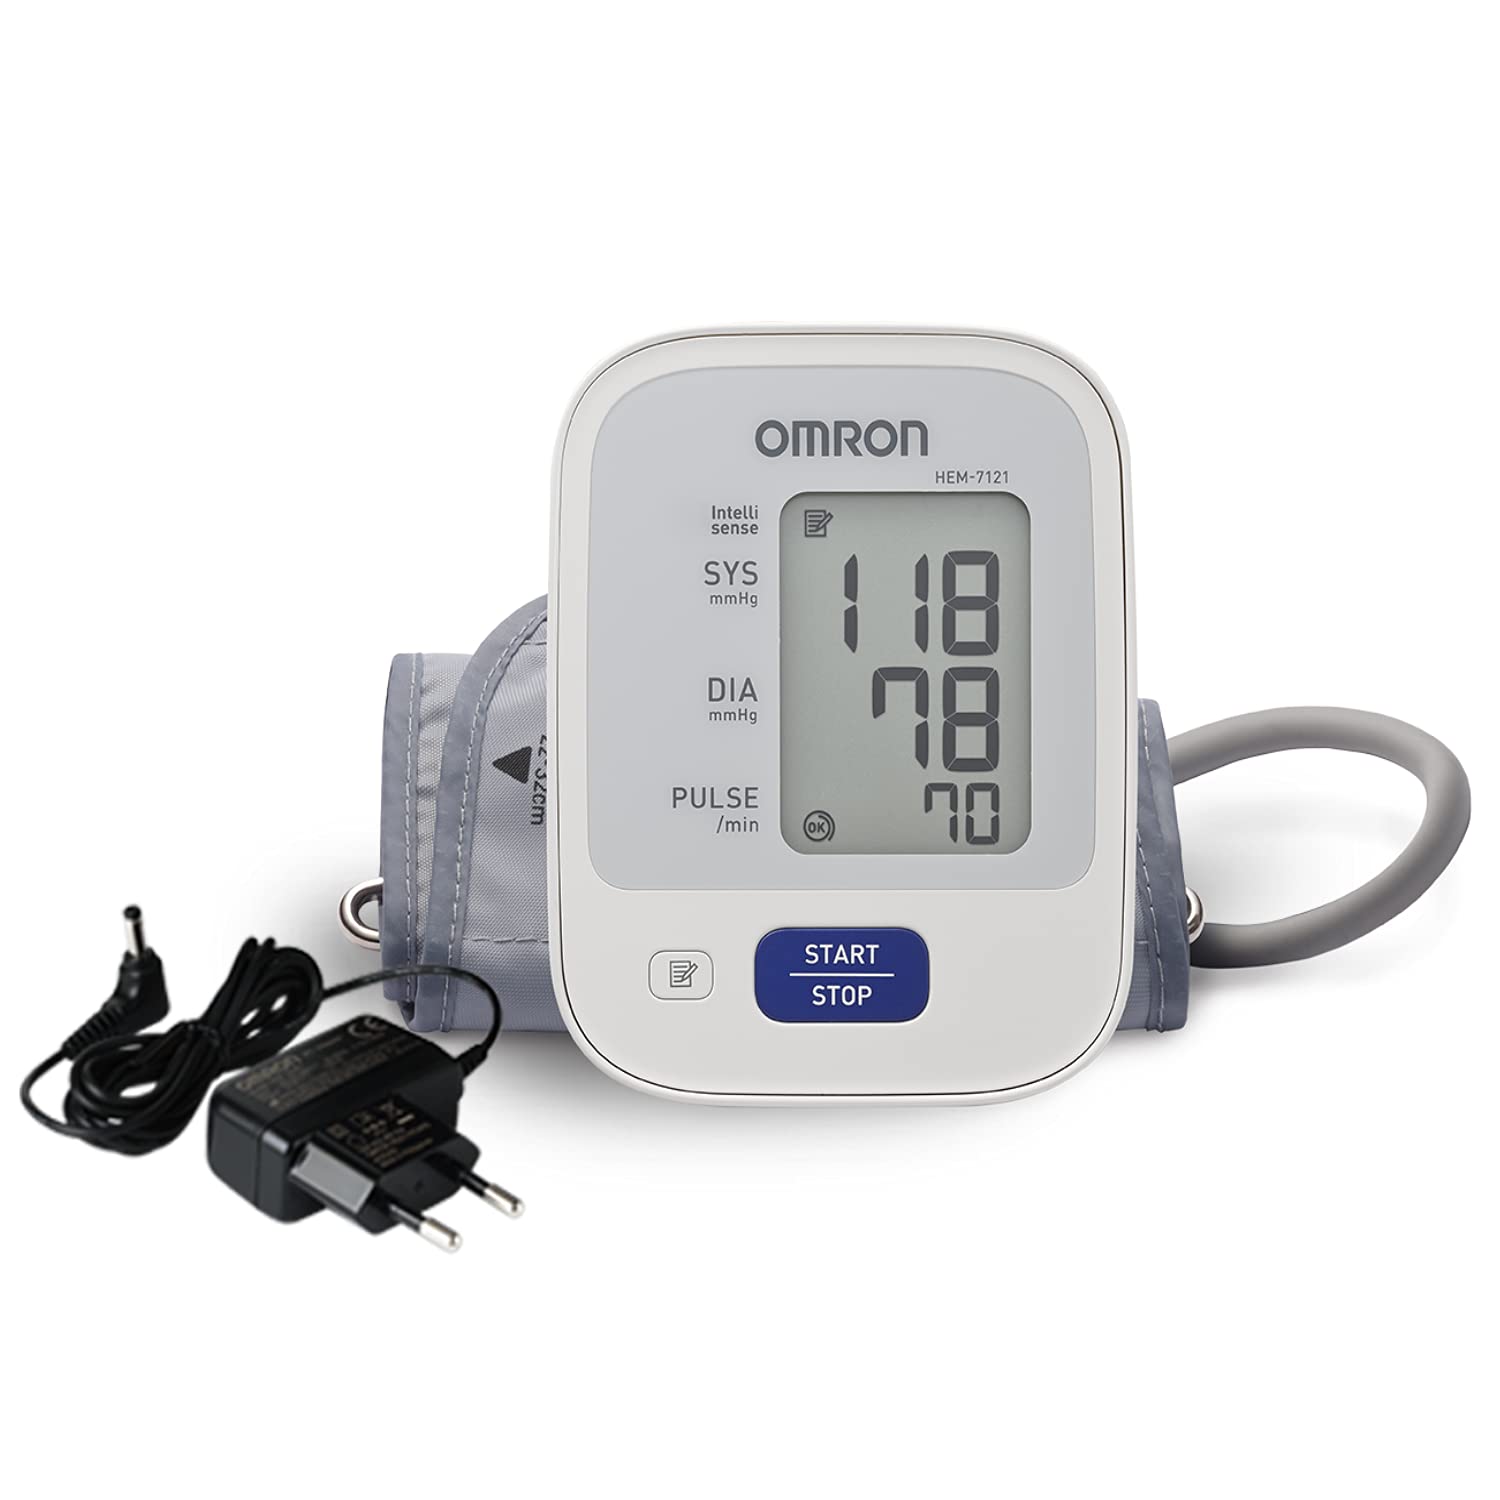 Omron HEM 7121 Fully Automatic Digital Blood Pressure Monitor With Intellisense Technology & Cuff Wrapping Guide For Most Accurate Measurement, White::blue, 16 X 11